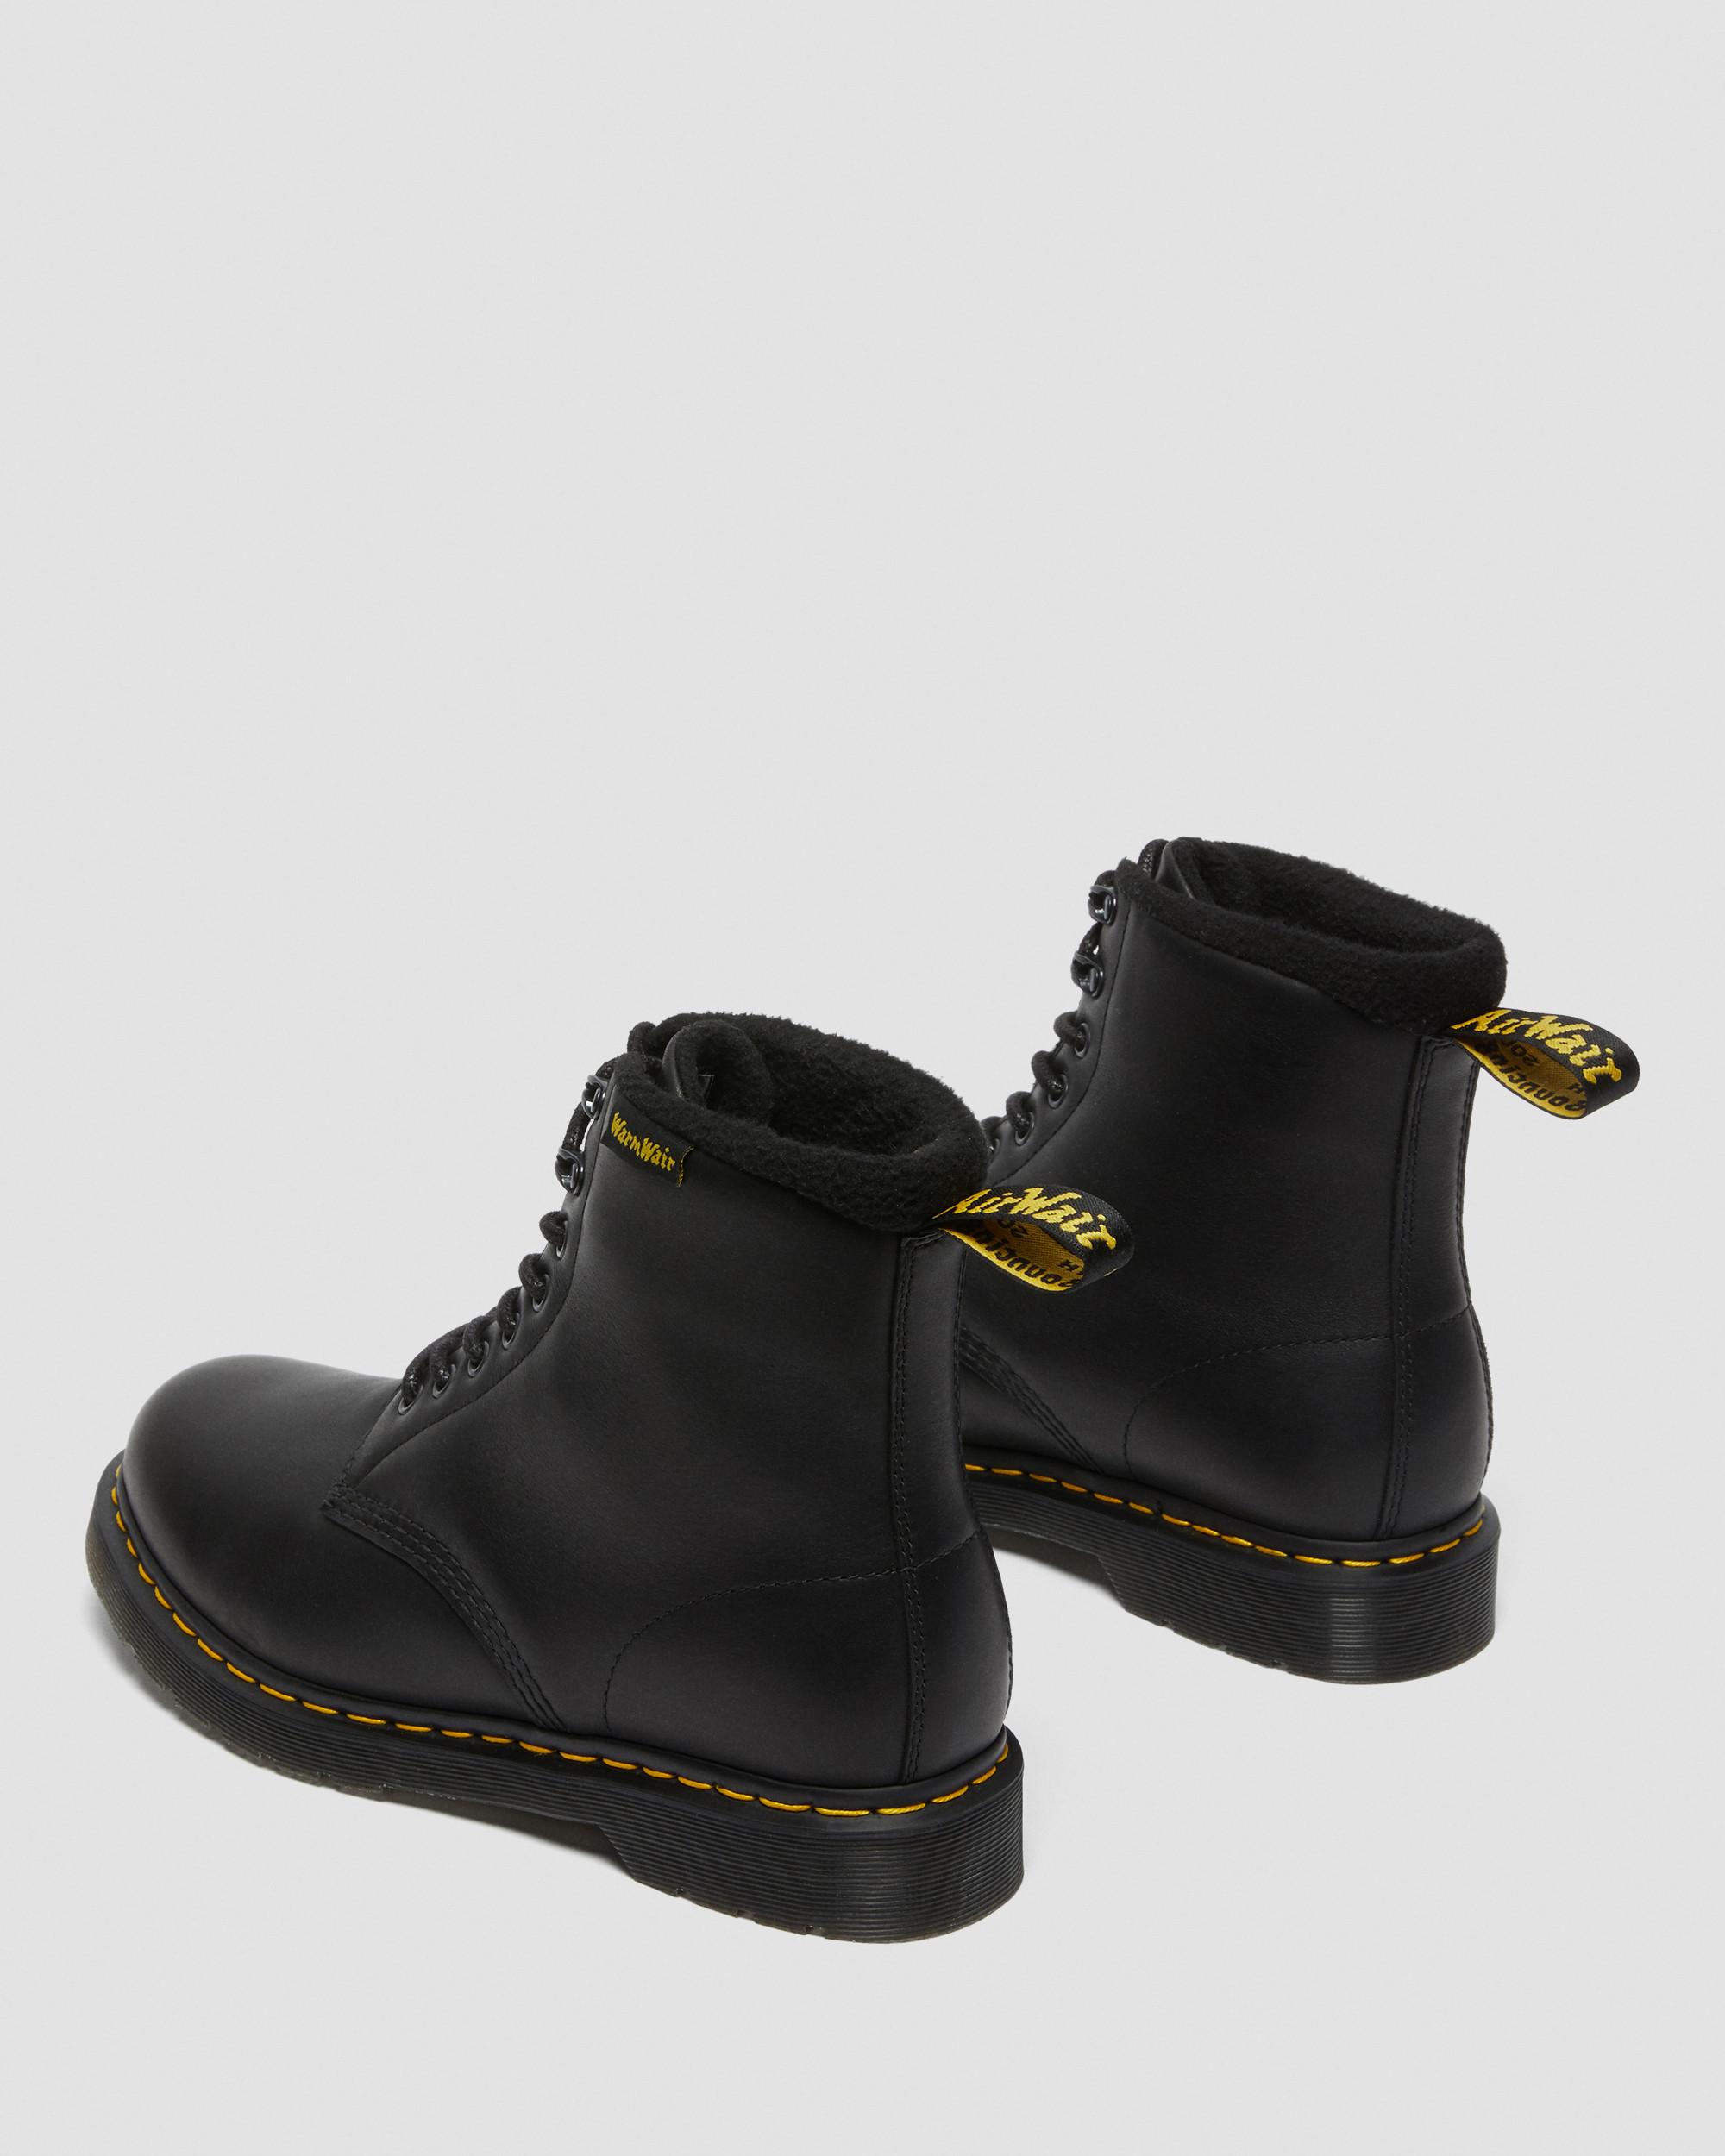 1460 Pascal Warmwair Leather Lace Up Boots, Black | Dr. Martens